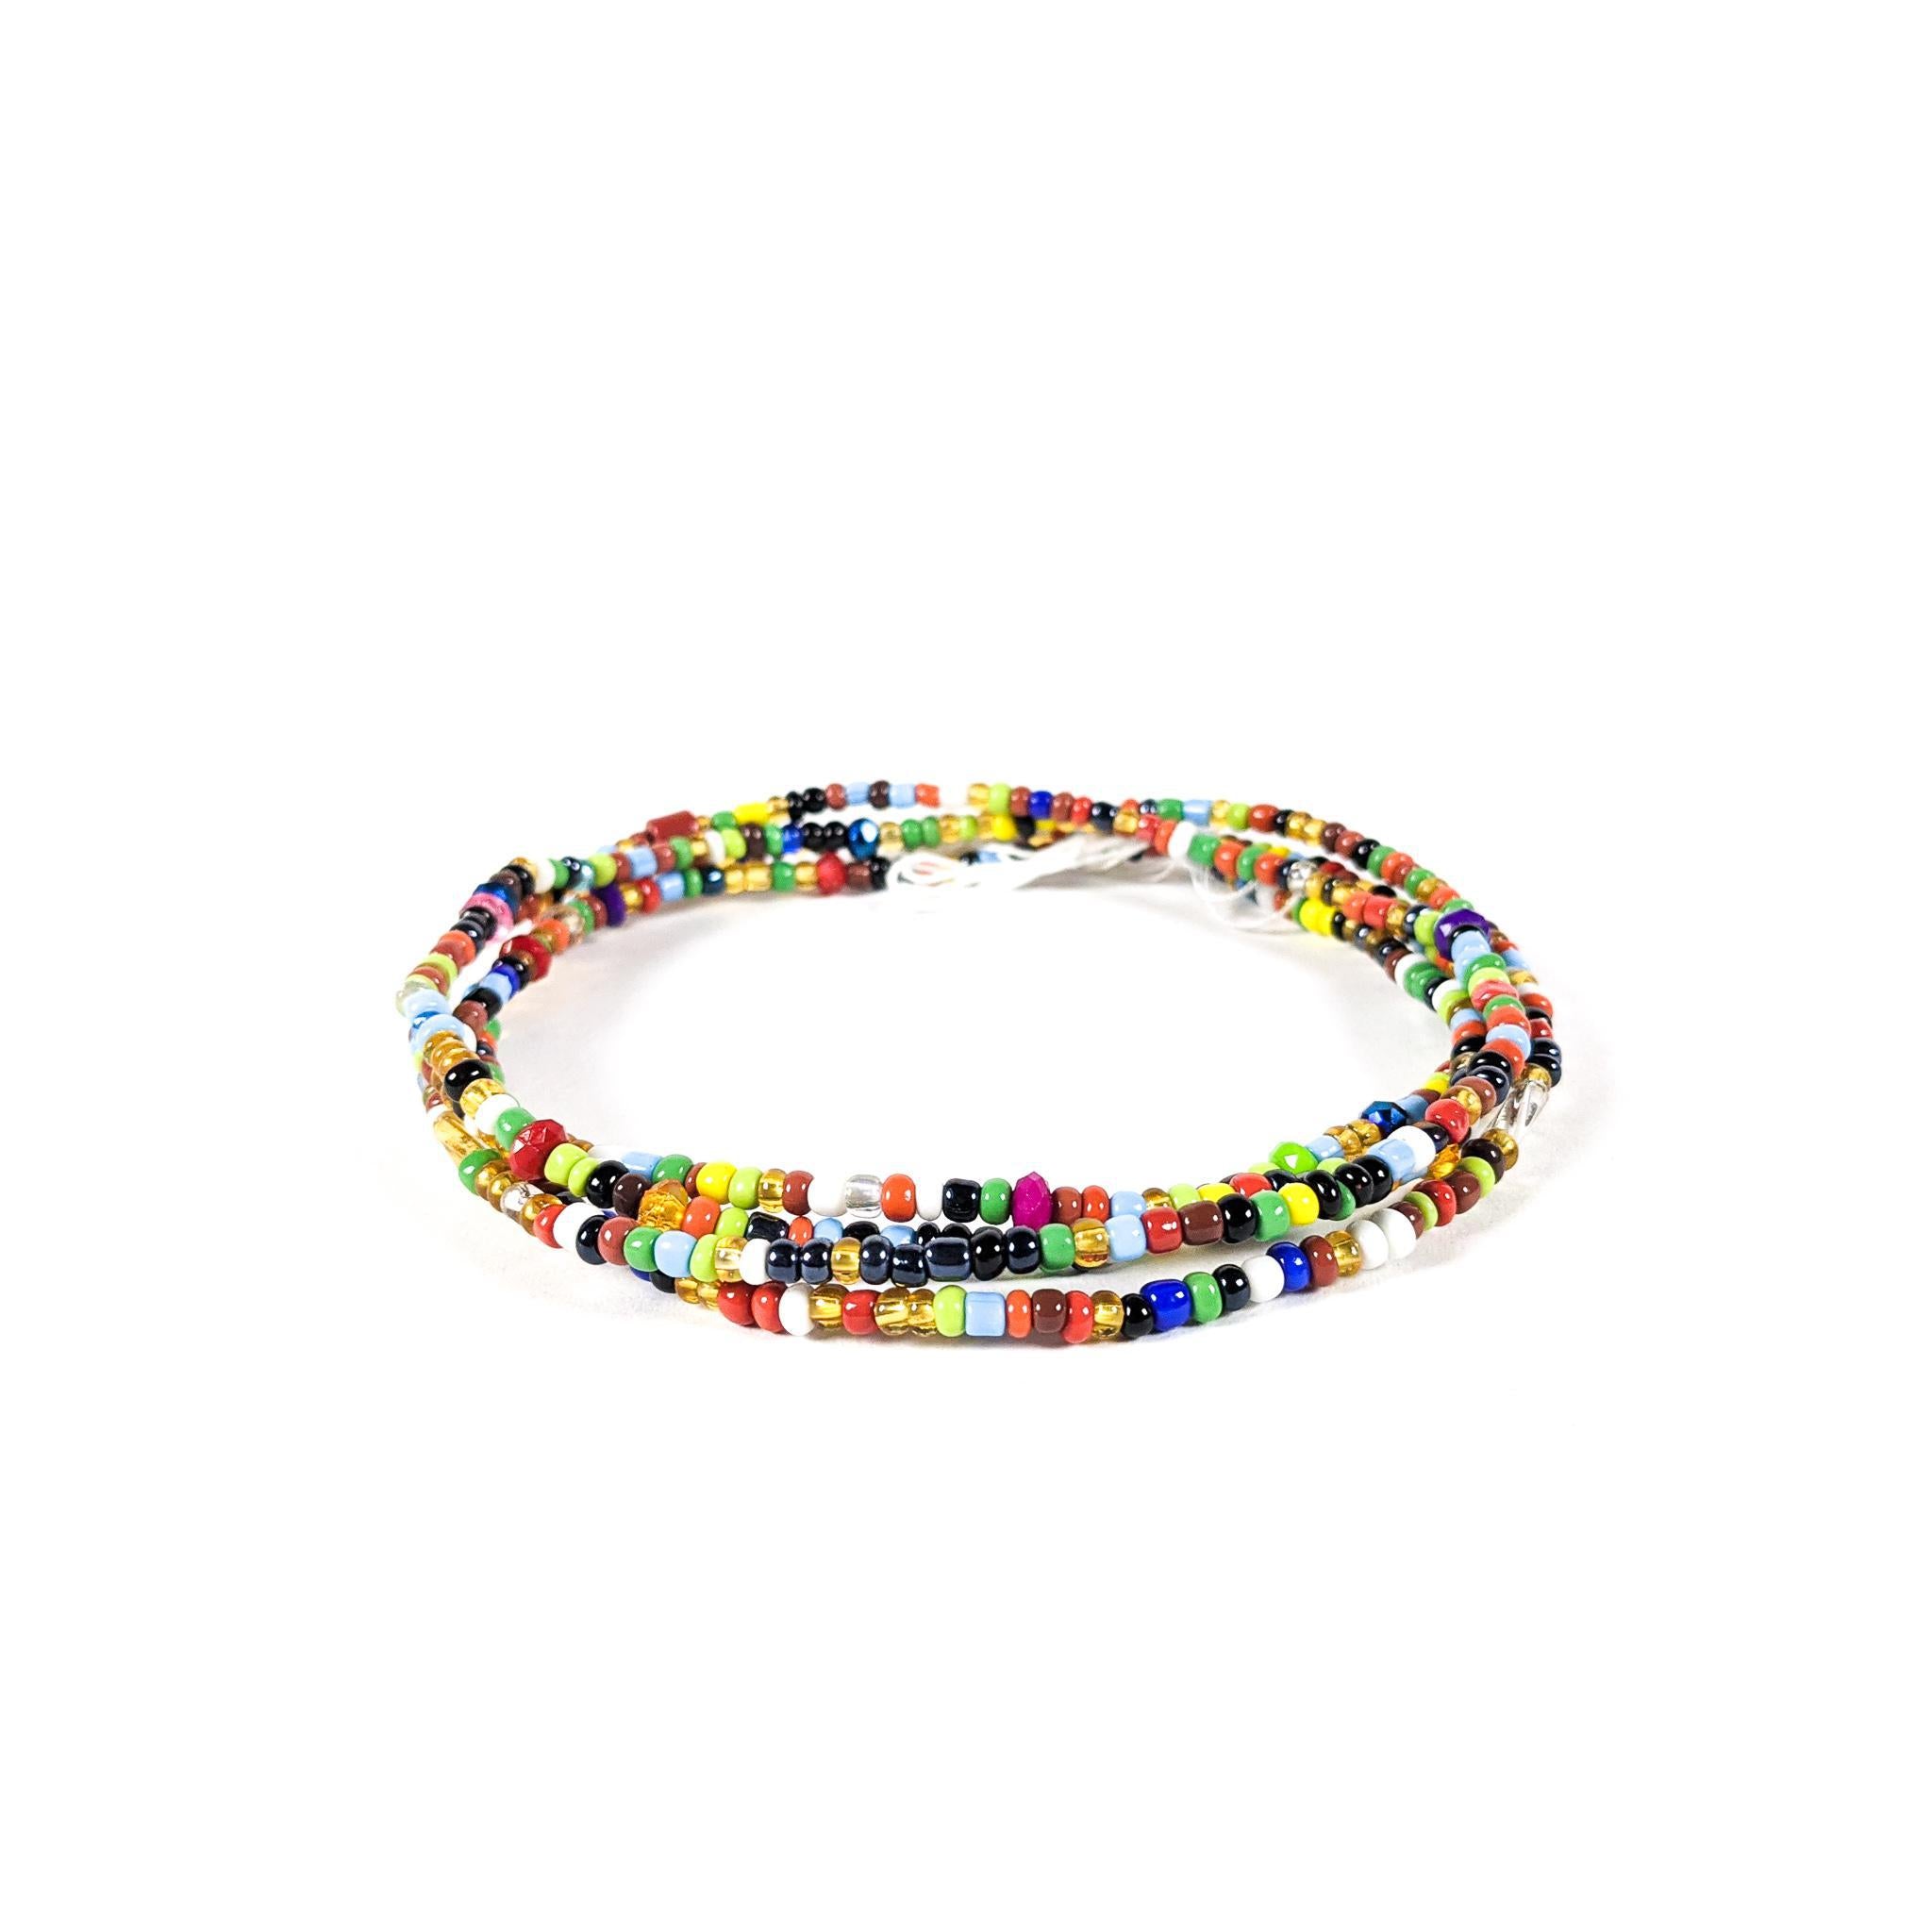 Multicolored String Tie Waist Beads